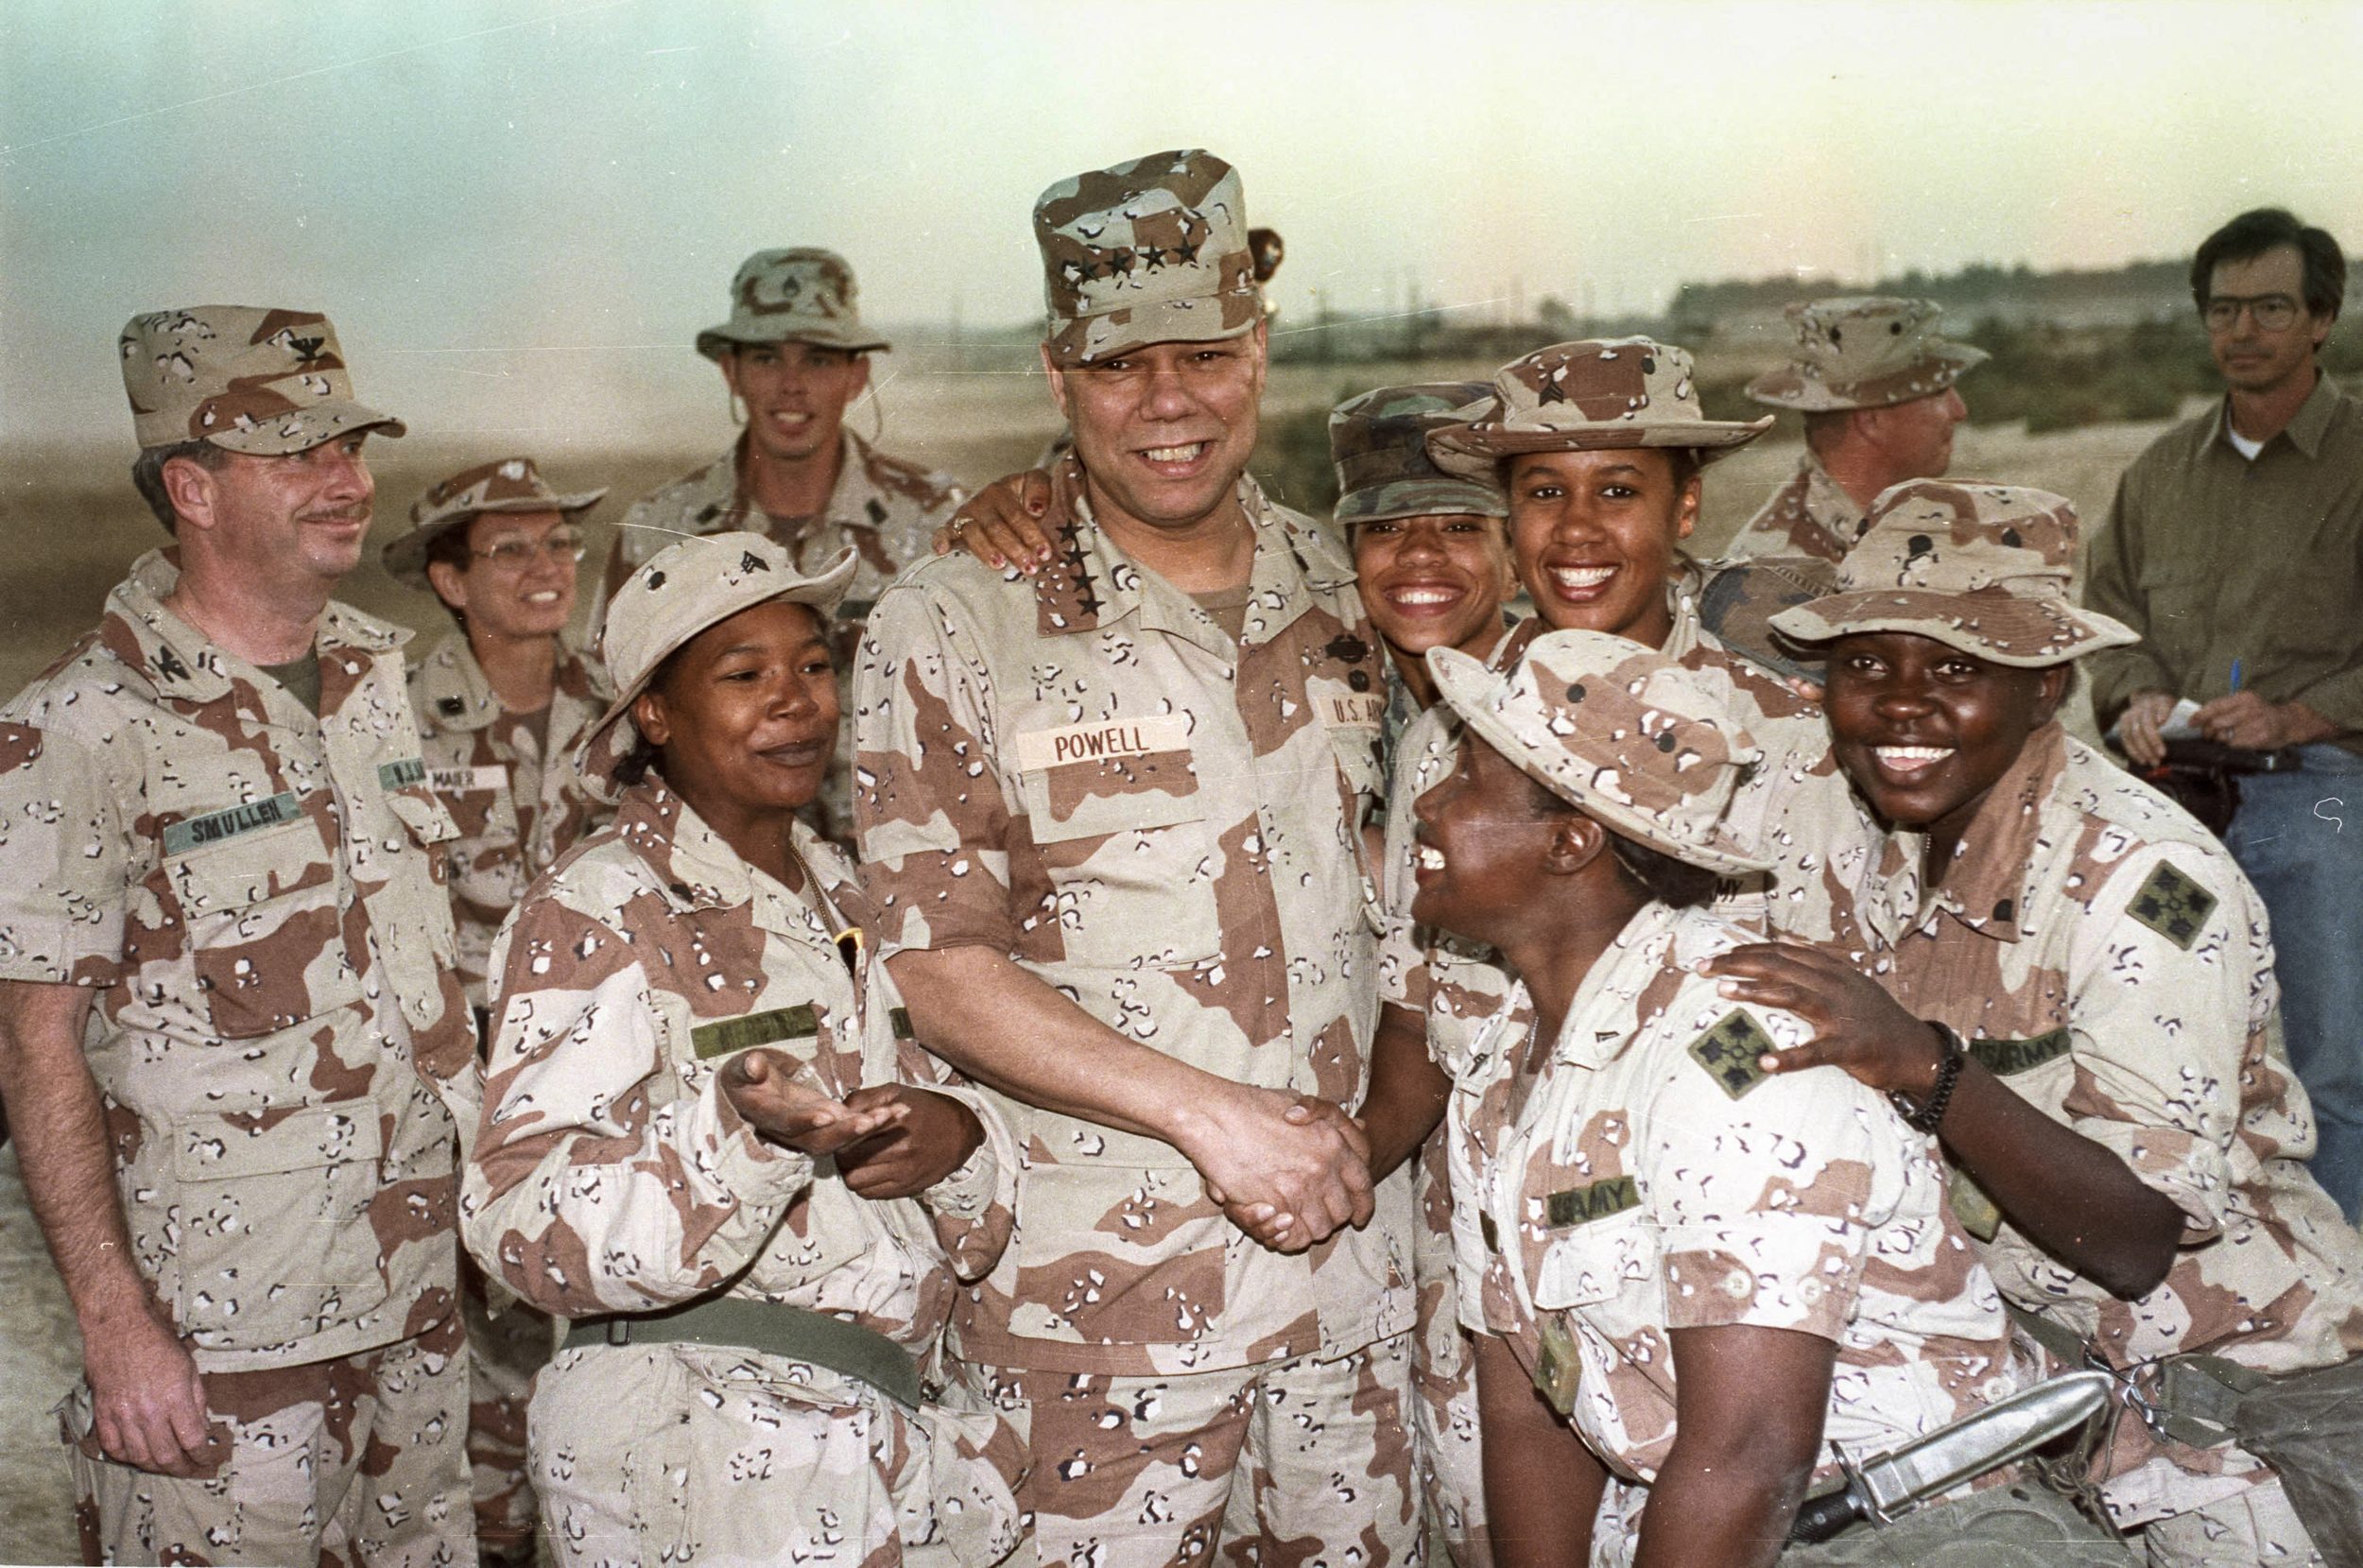 best-quality-available-chairman-of-the-joint-chiefs-of-staff-general-colin-powell-c-and-members-of-the-132nd-mp-company-pose-for-photographs-in-saudi-arabia